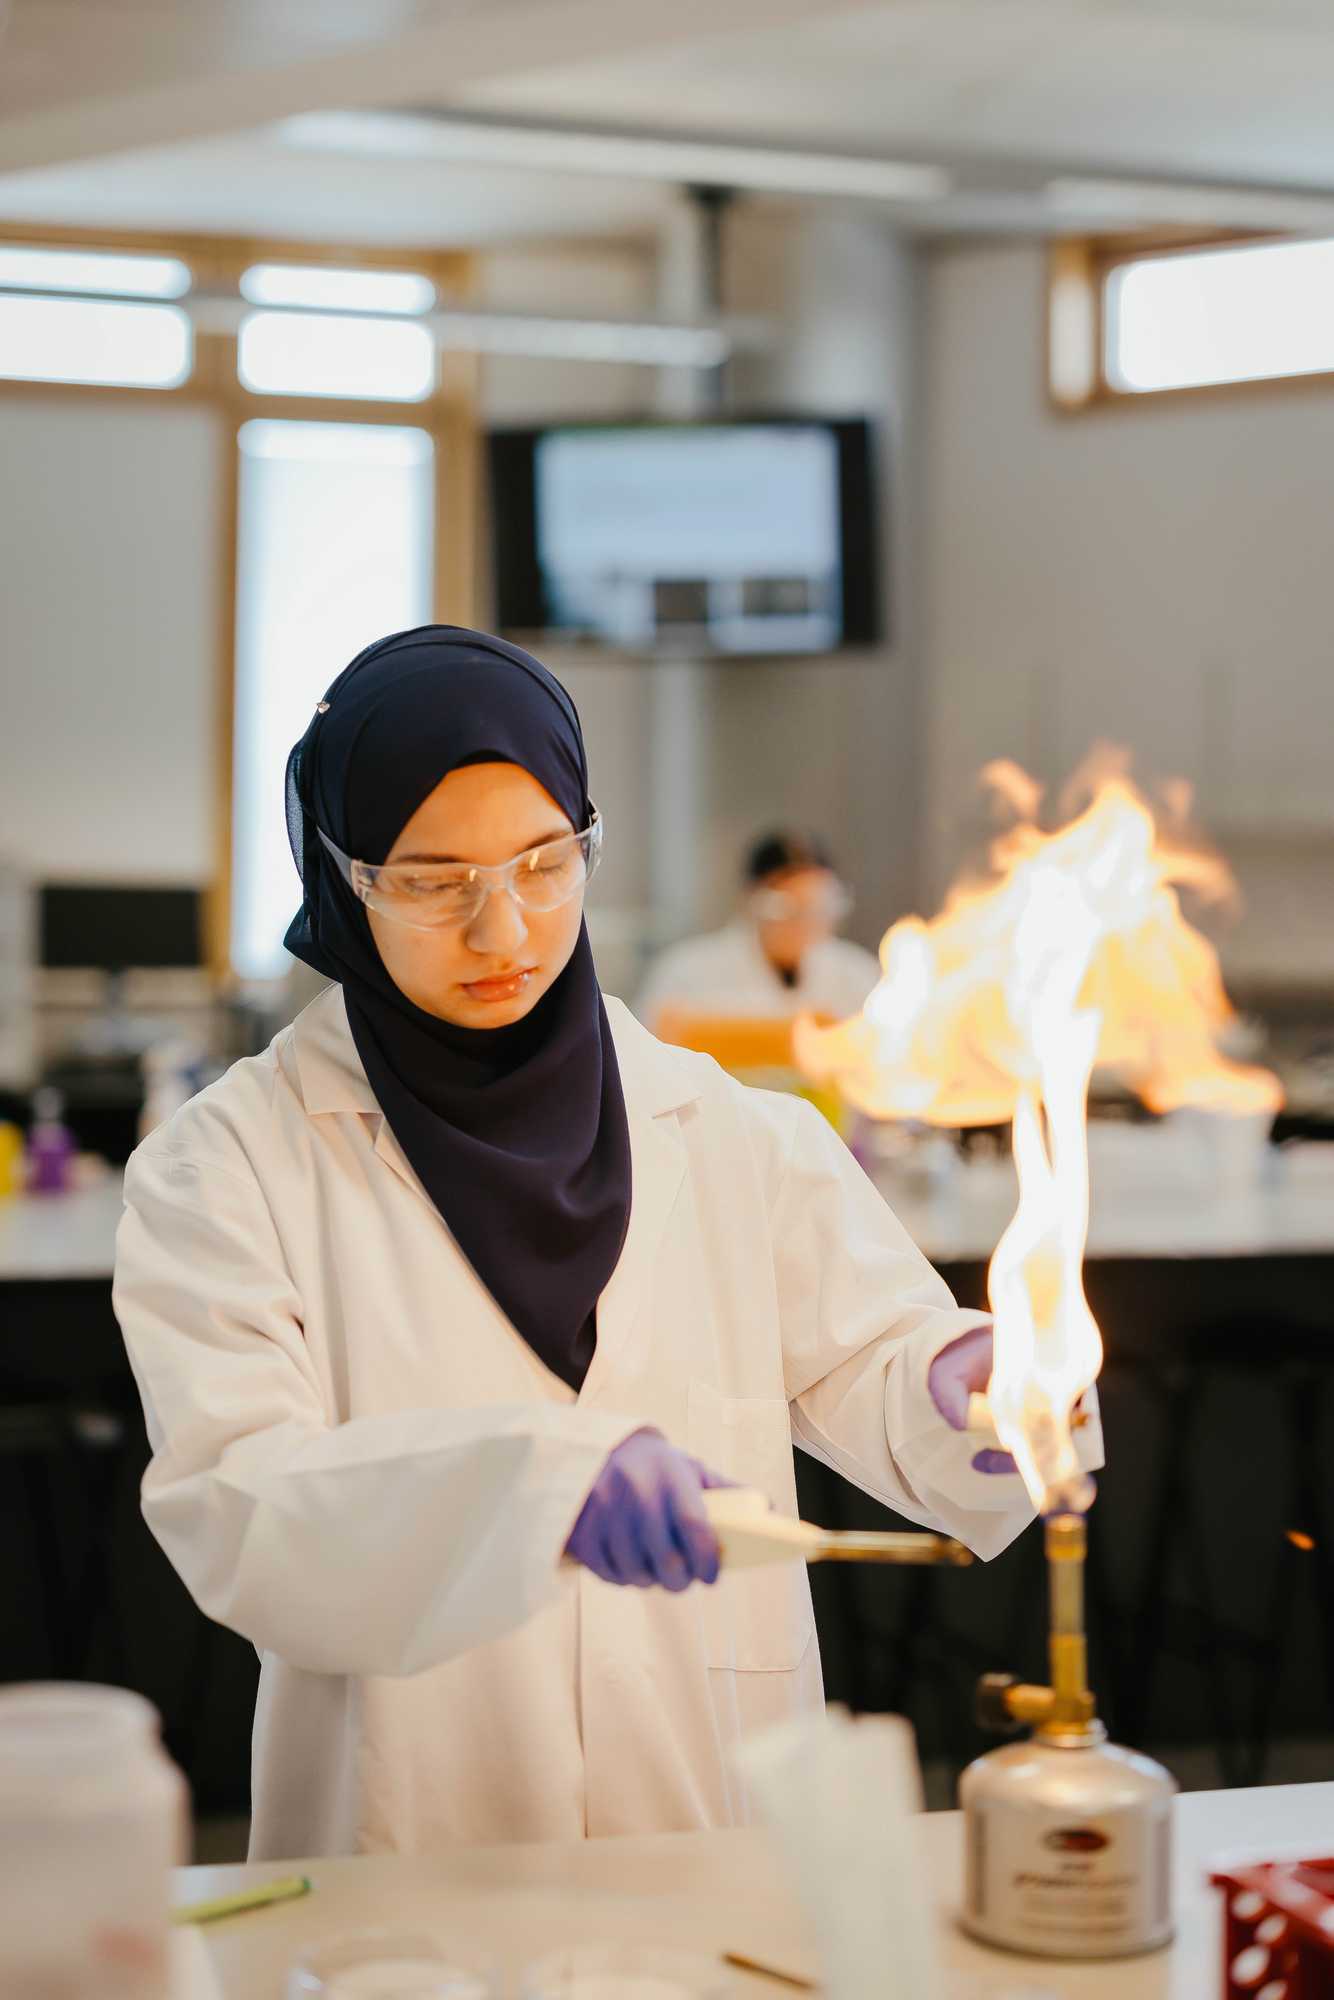 Biomedical Science student experimenting in a lab